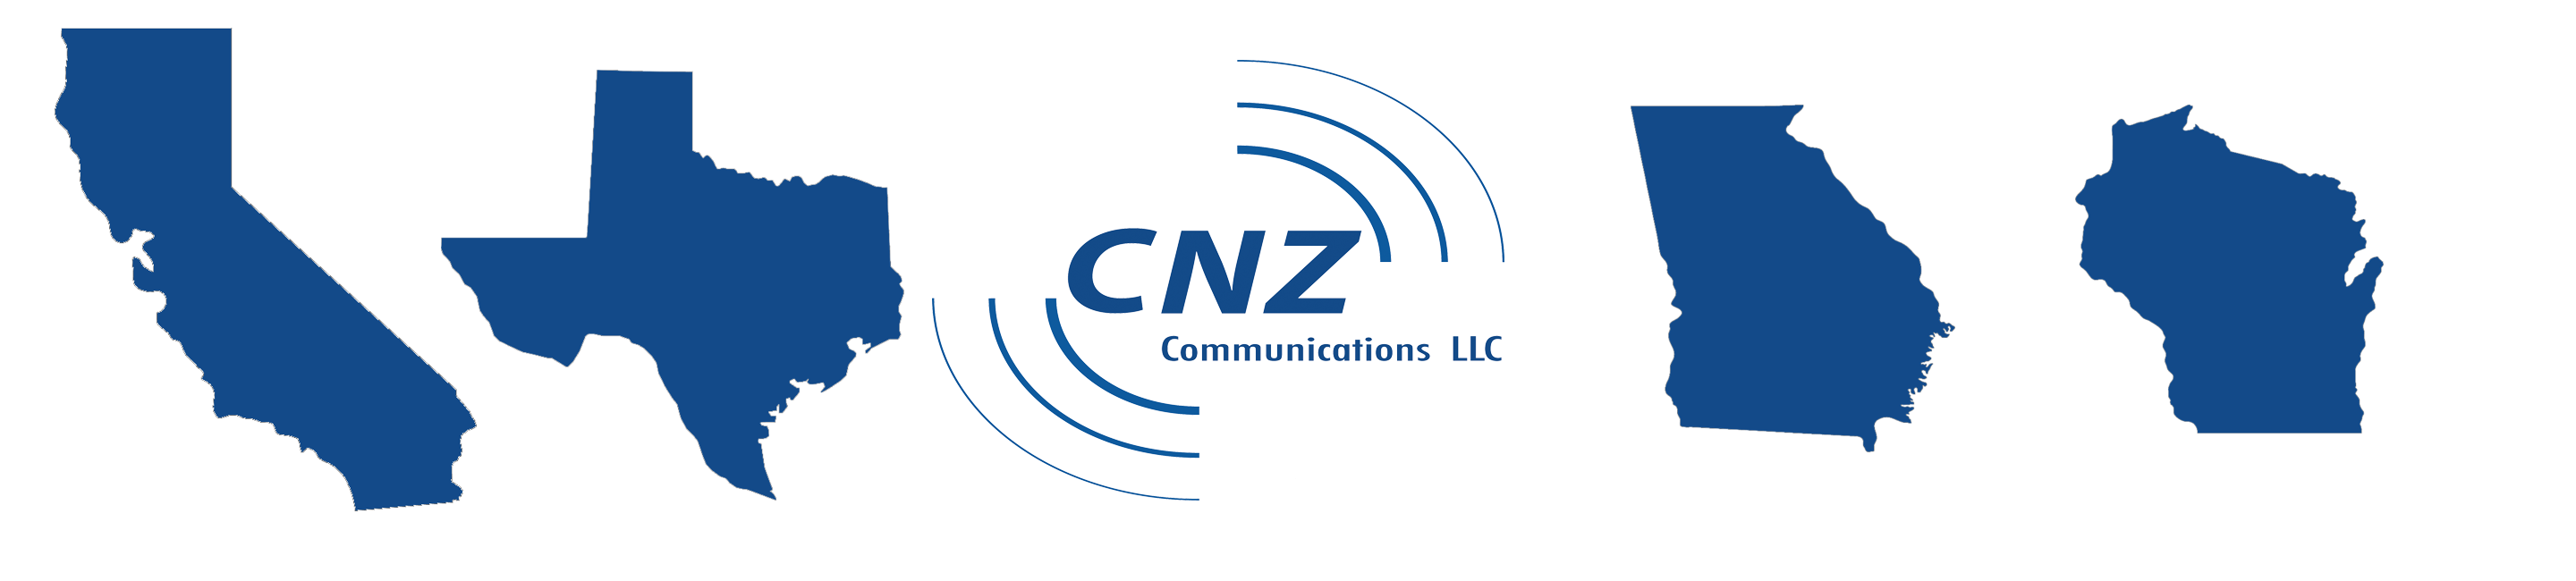 CNZ Communications LLC With States